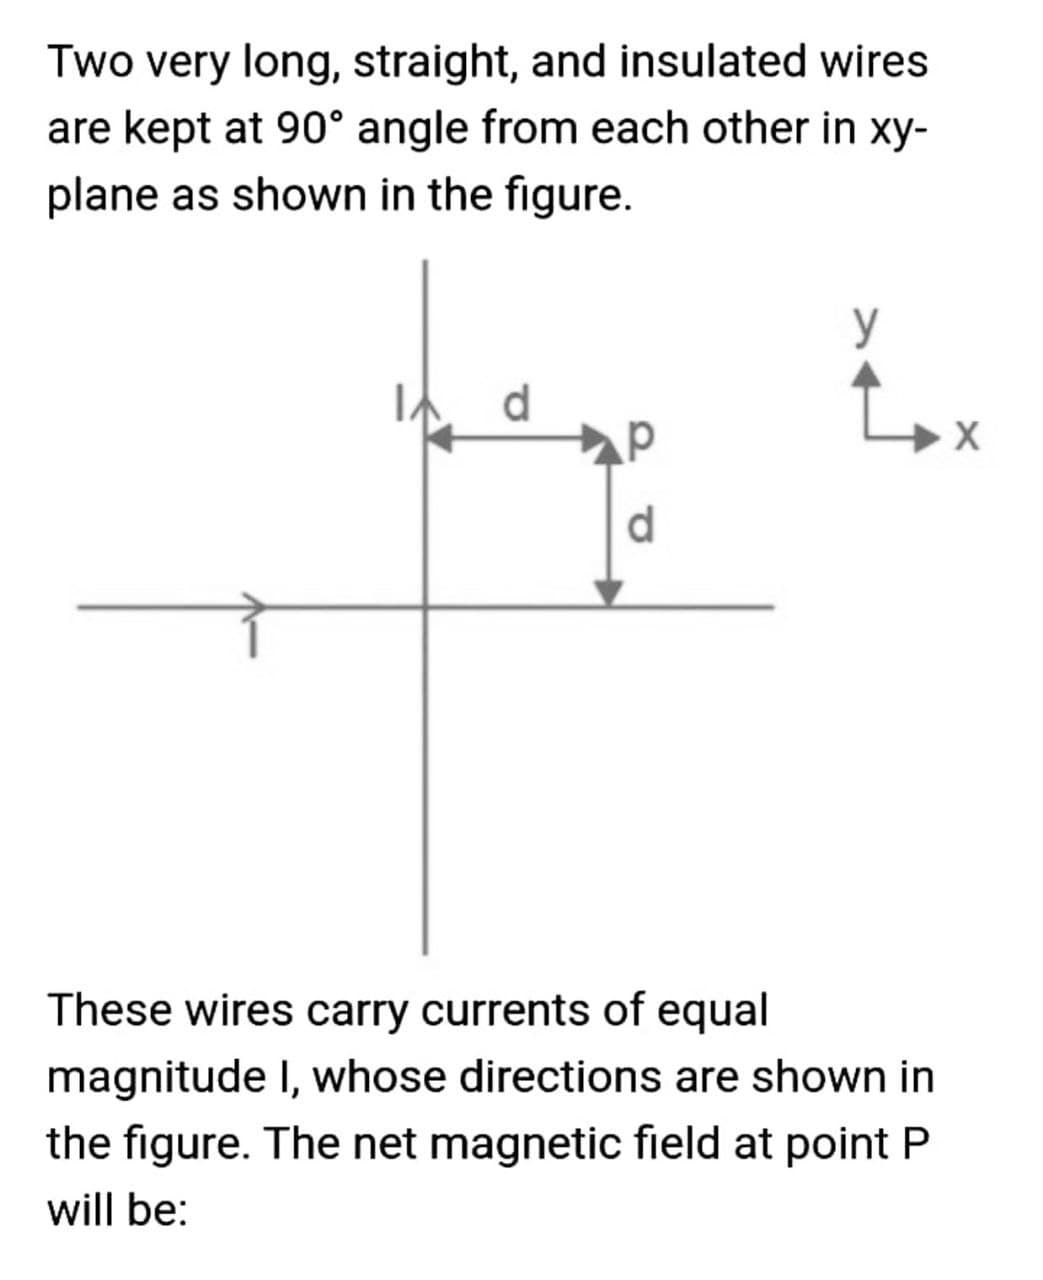 Two very long, straight, and insulated wires
are kept at 90° angle from each other in xy-
plane as shown in the figure.
y
d
d.
These wires carry currents of equal
magnitude I, whose directions are shown in
the figure. The net magnetic field at point P
will be:
